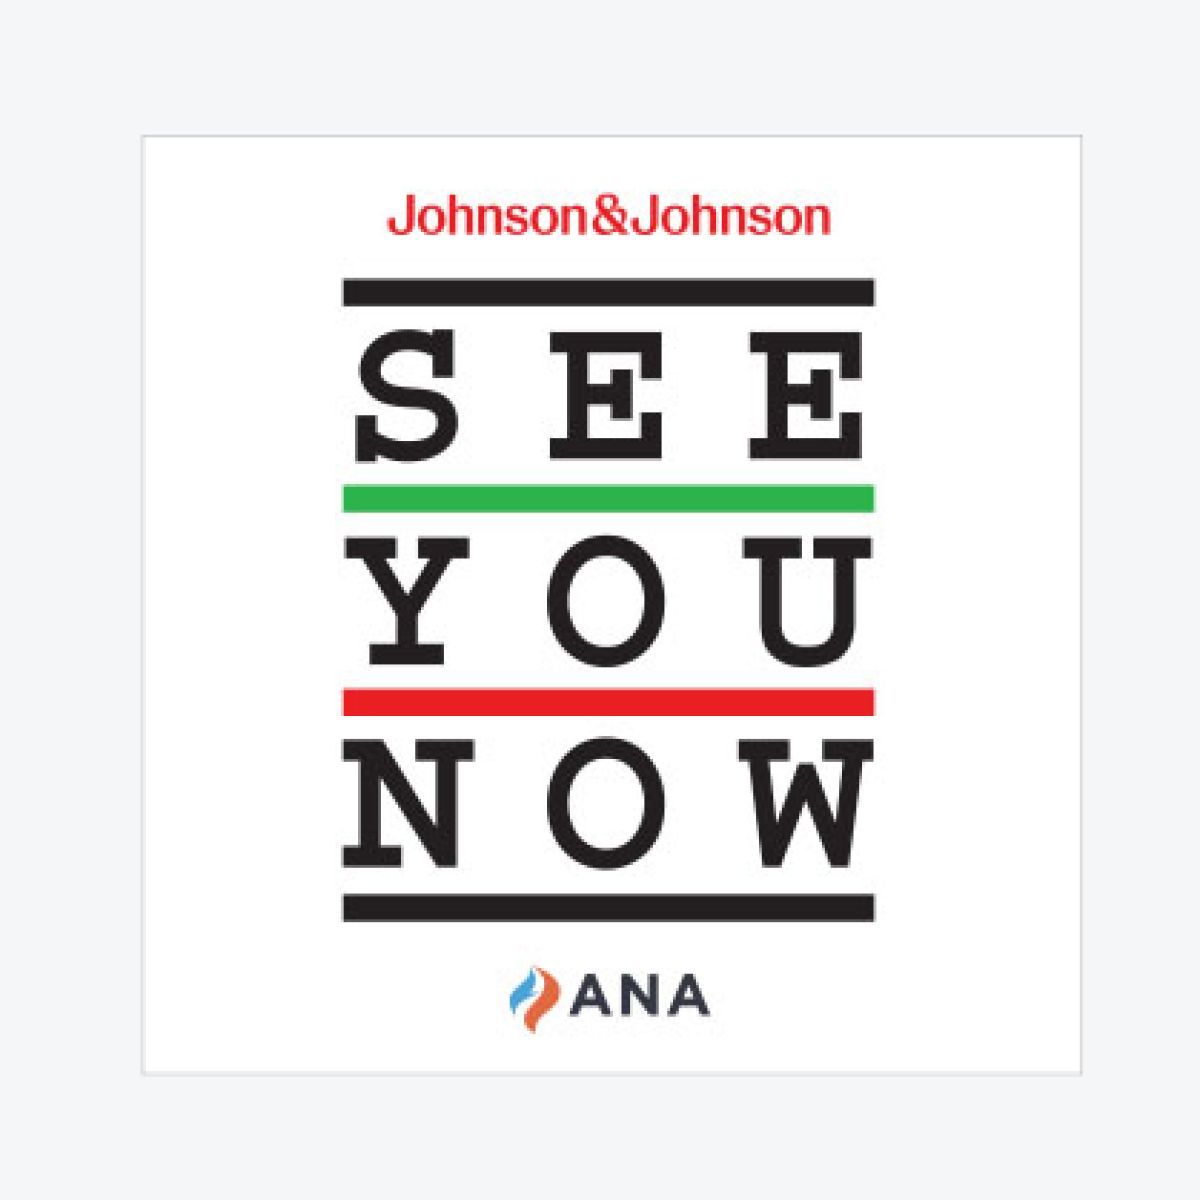 🎧 #JohnsonandJohnson - Calling All Game Changers + Trailblazers

Recorded live at the 2023 DNPs of Color conference, tune in to hear from extraordinary nurse leaders shifting entrenched power dynamics + blazing new trails of oppty for nurses of color. buff.ly/3IXaTyH